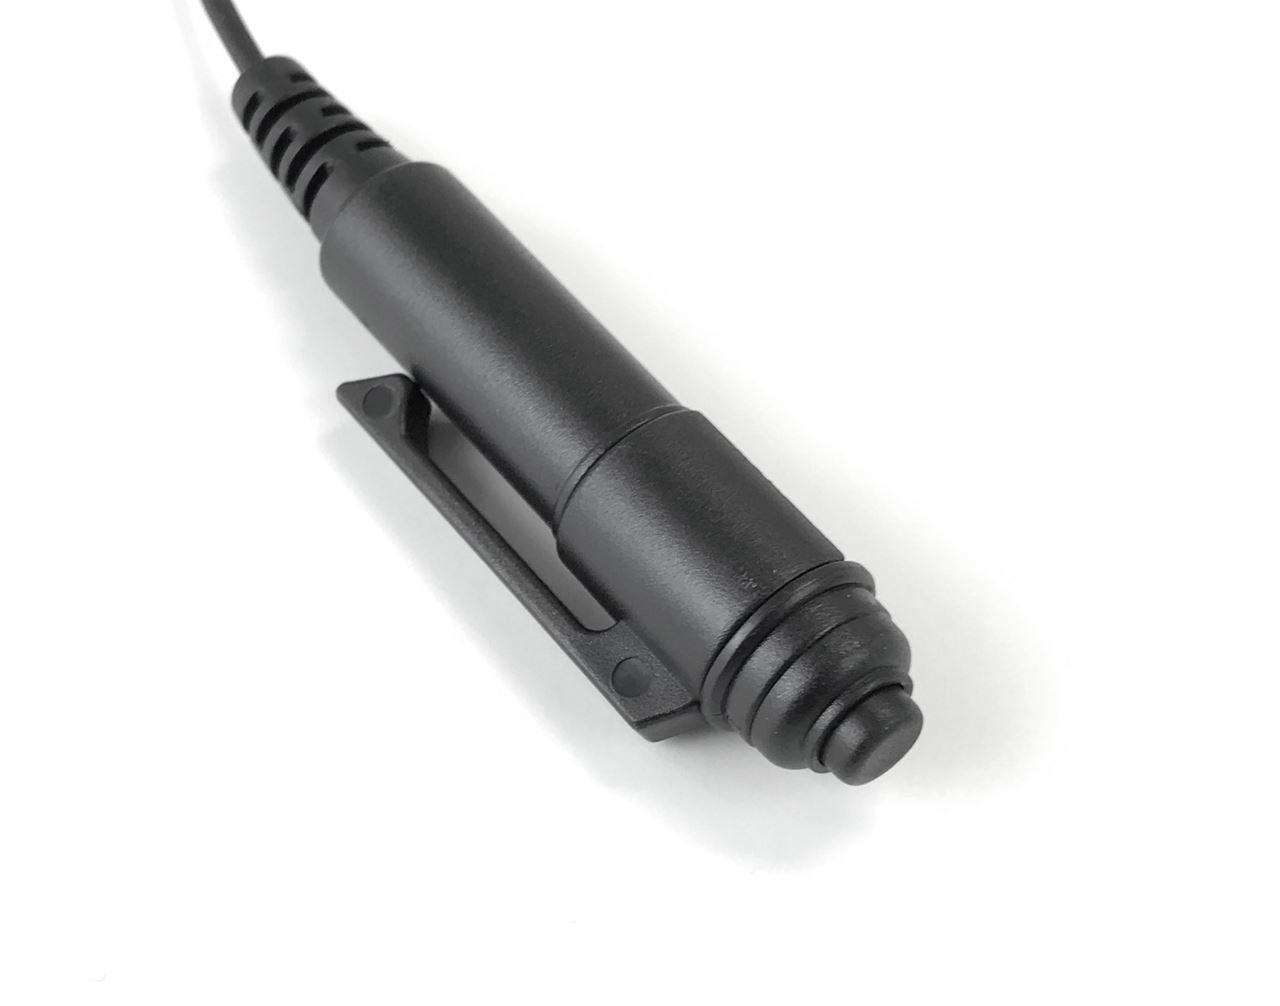 Comparable KHS-12 3 wire mini lapel mic with earphone for use with the Kenwood NX-5400 Portable Radio - Waveband Communications